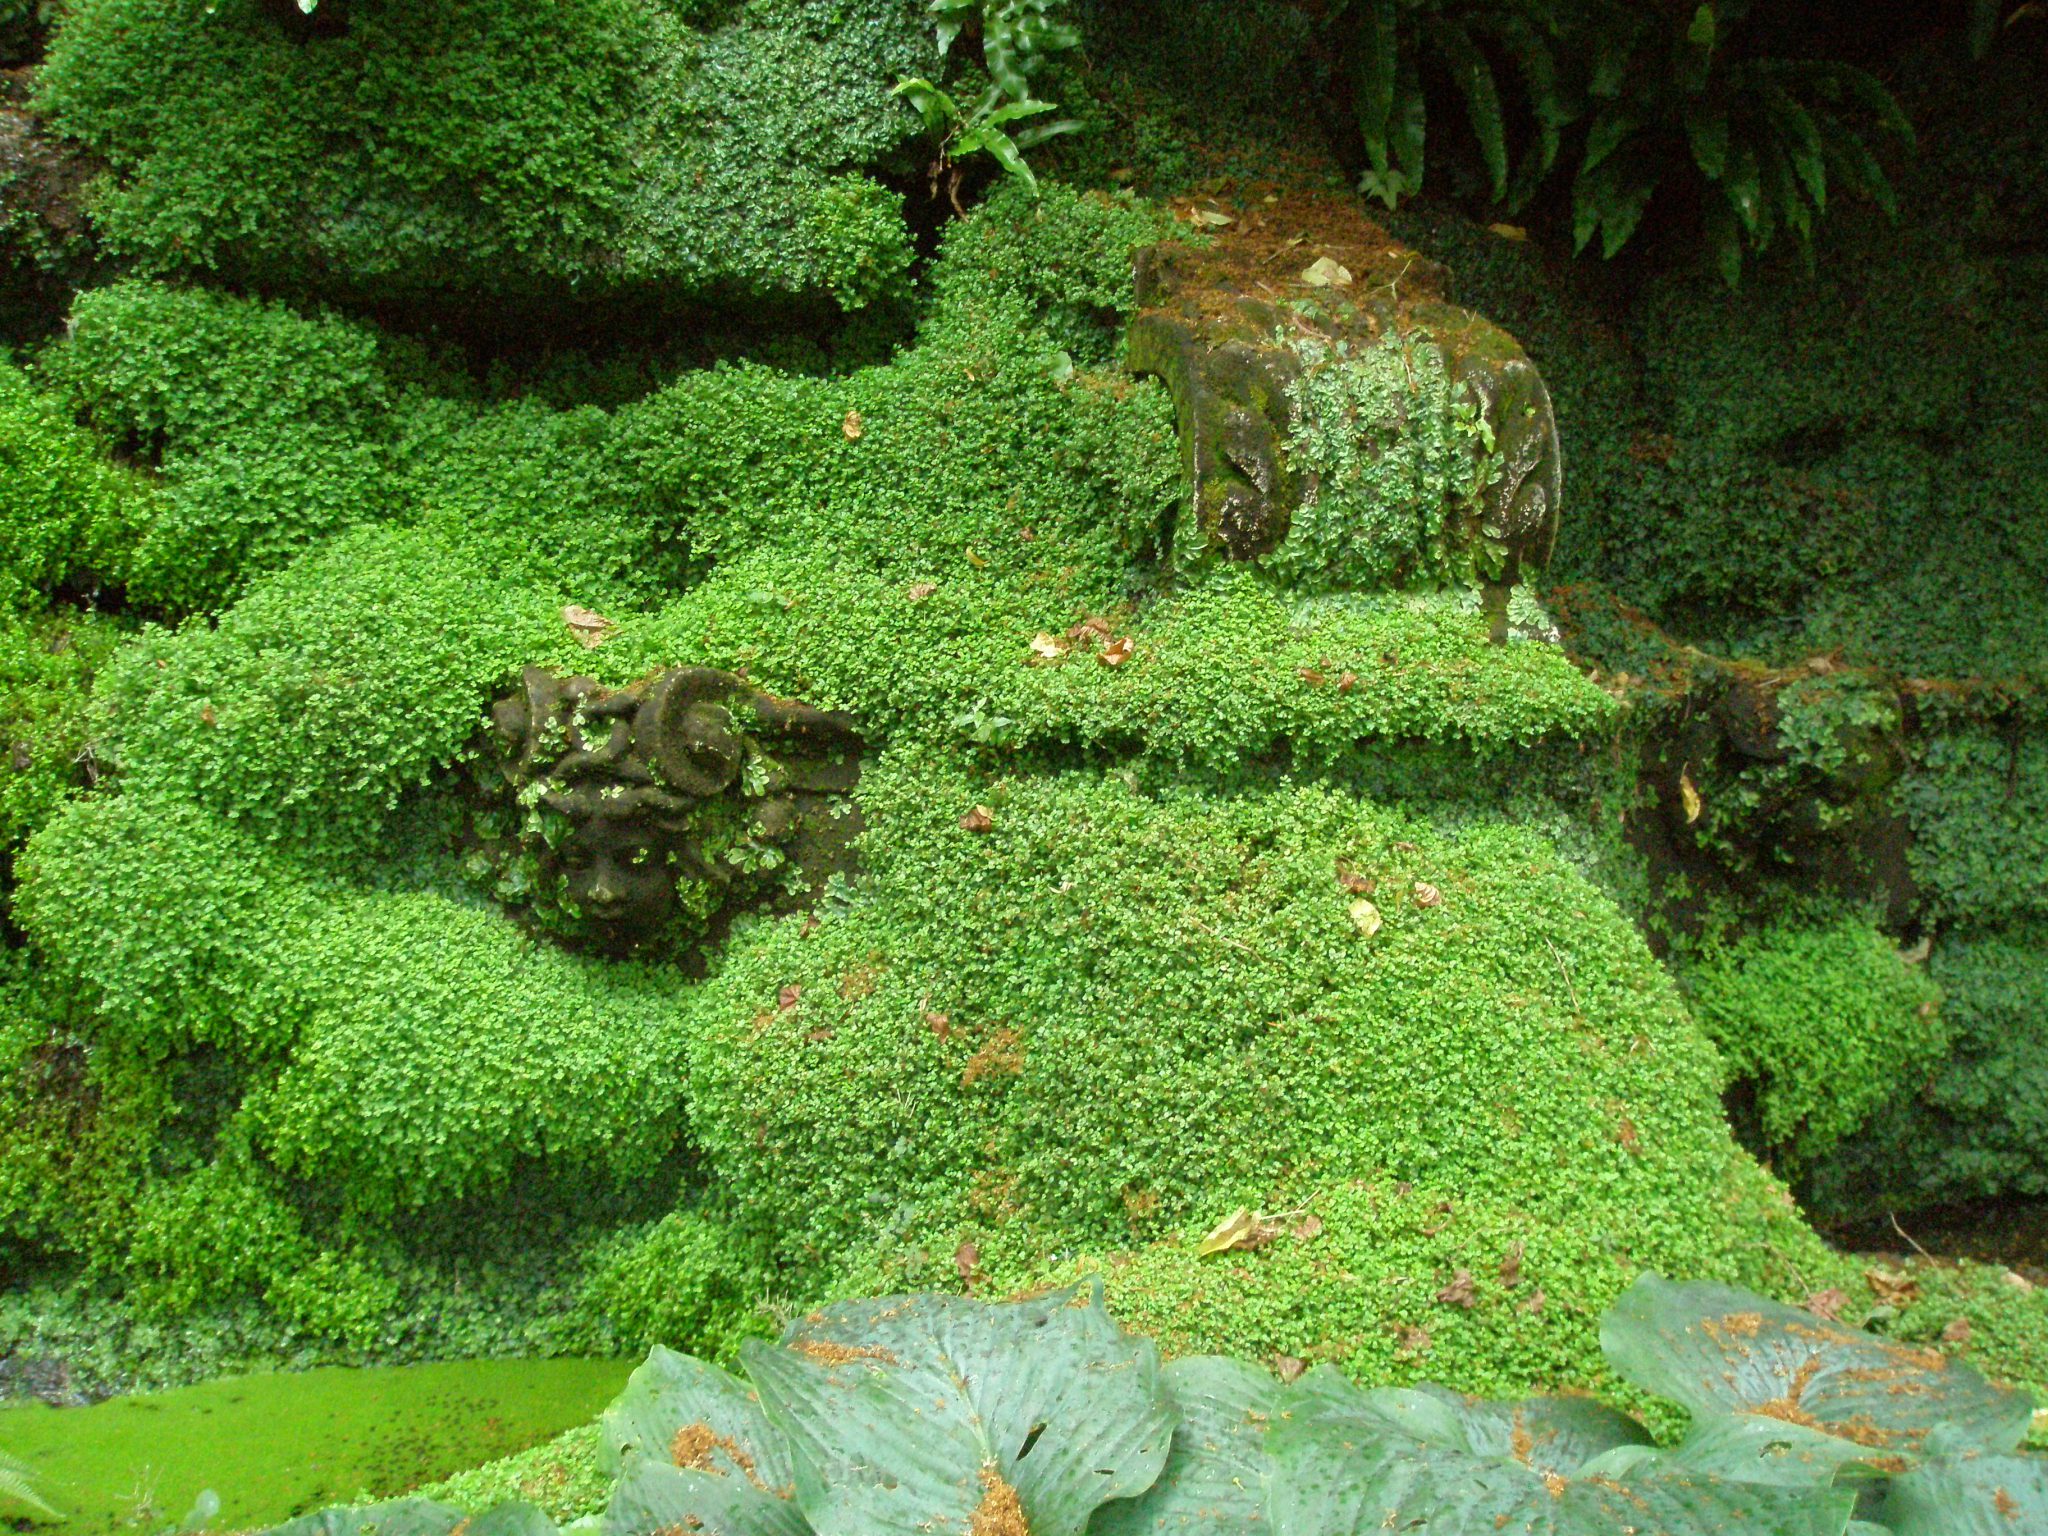 Statues in the Grottoes are nearly swallowed up by greenery.